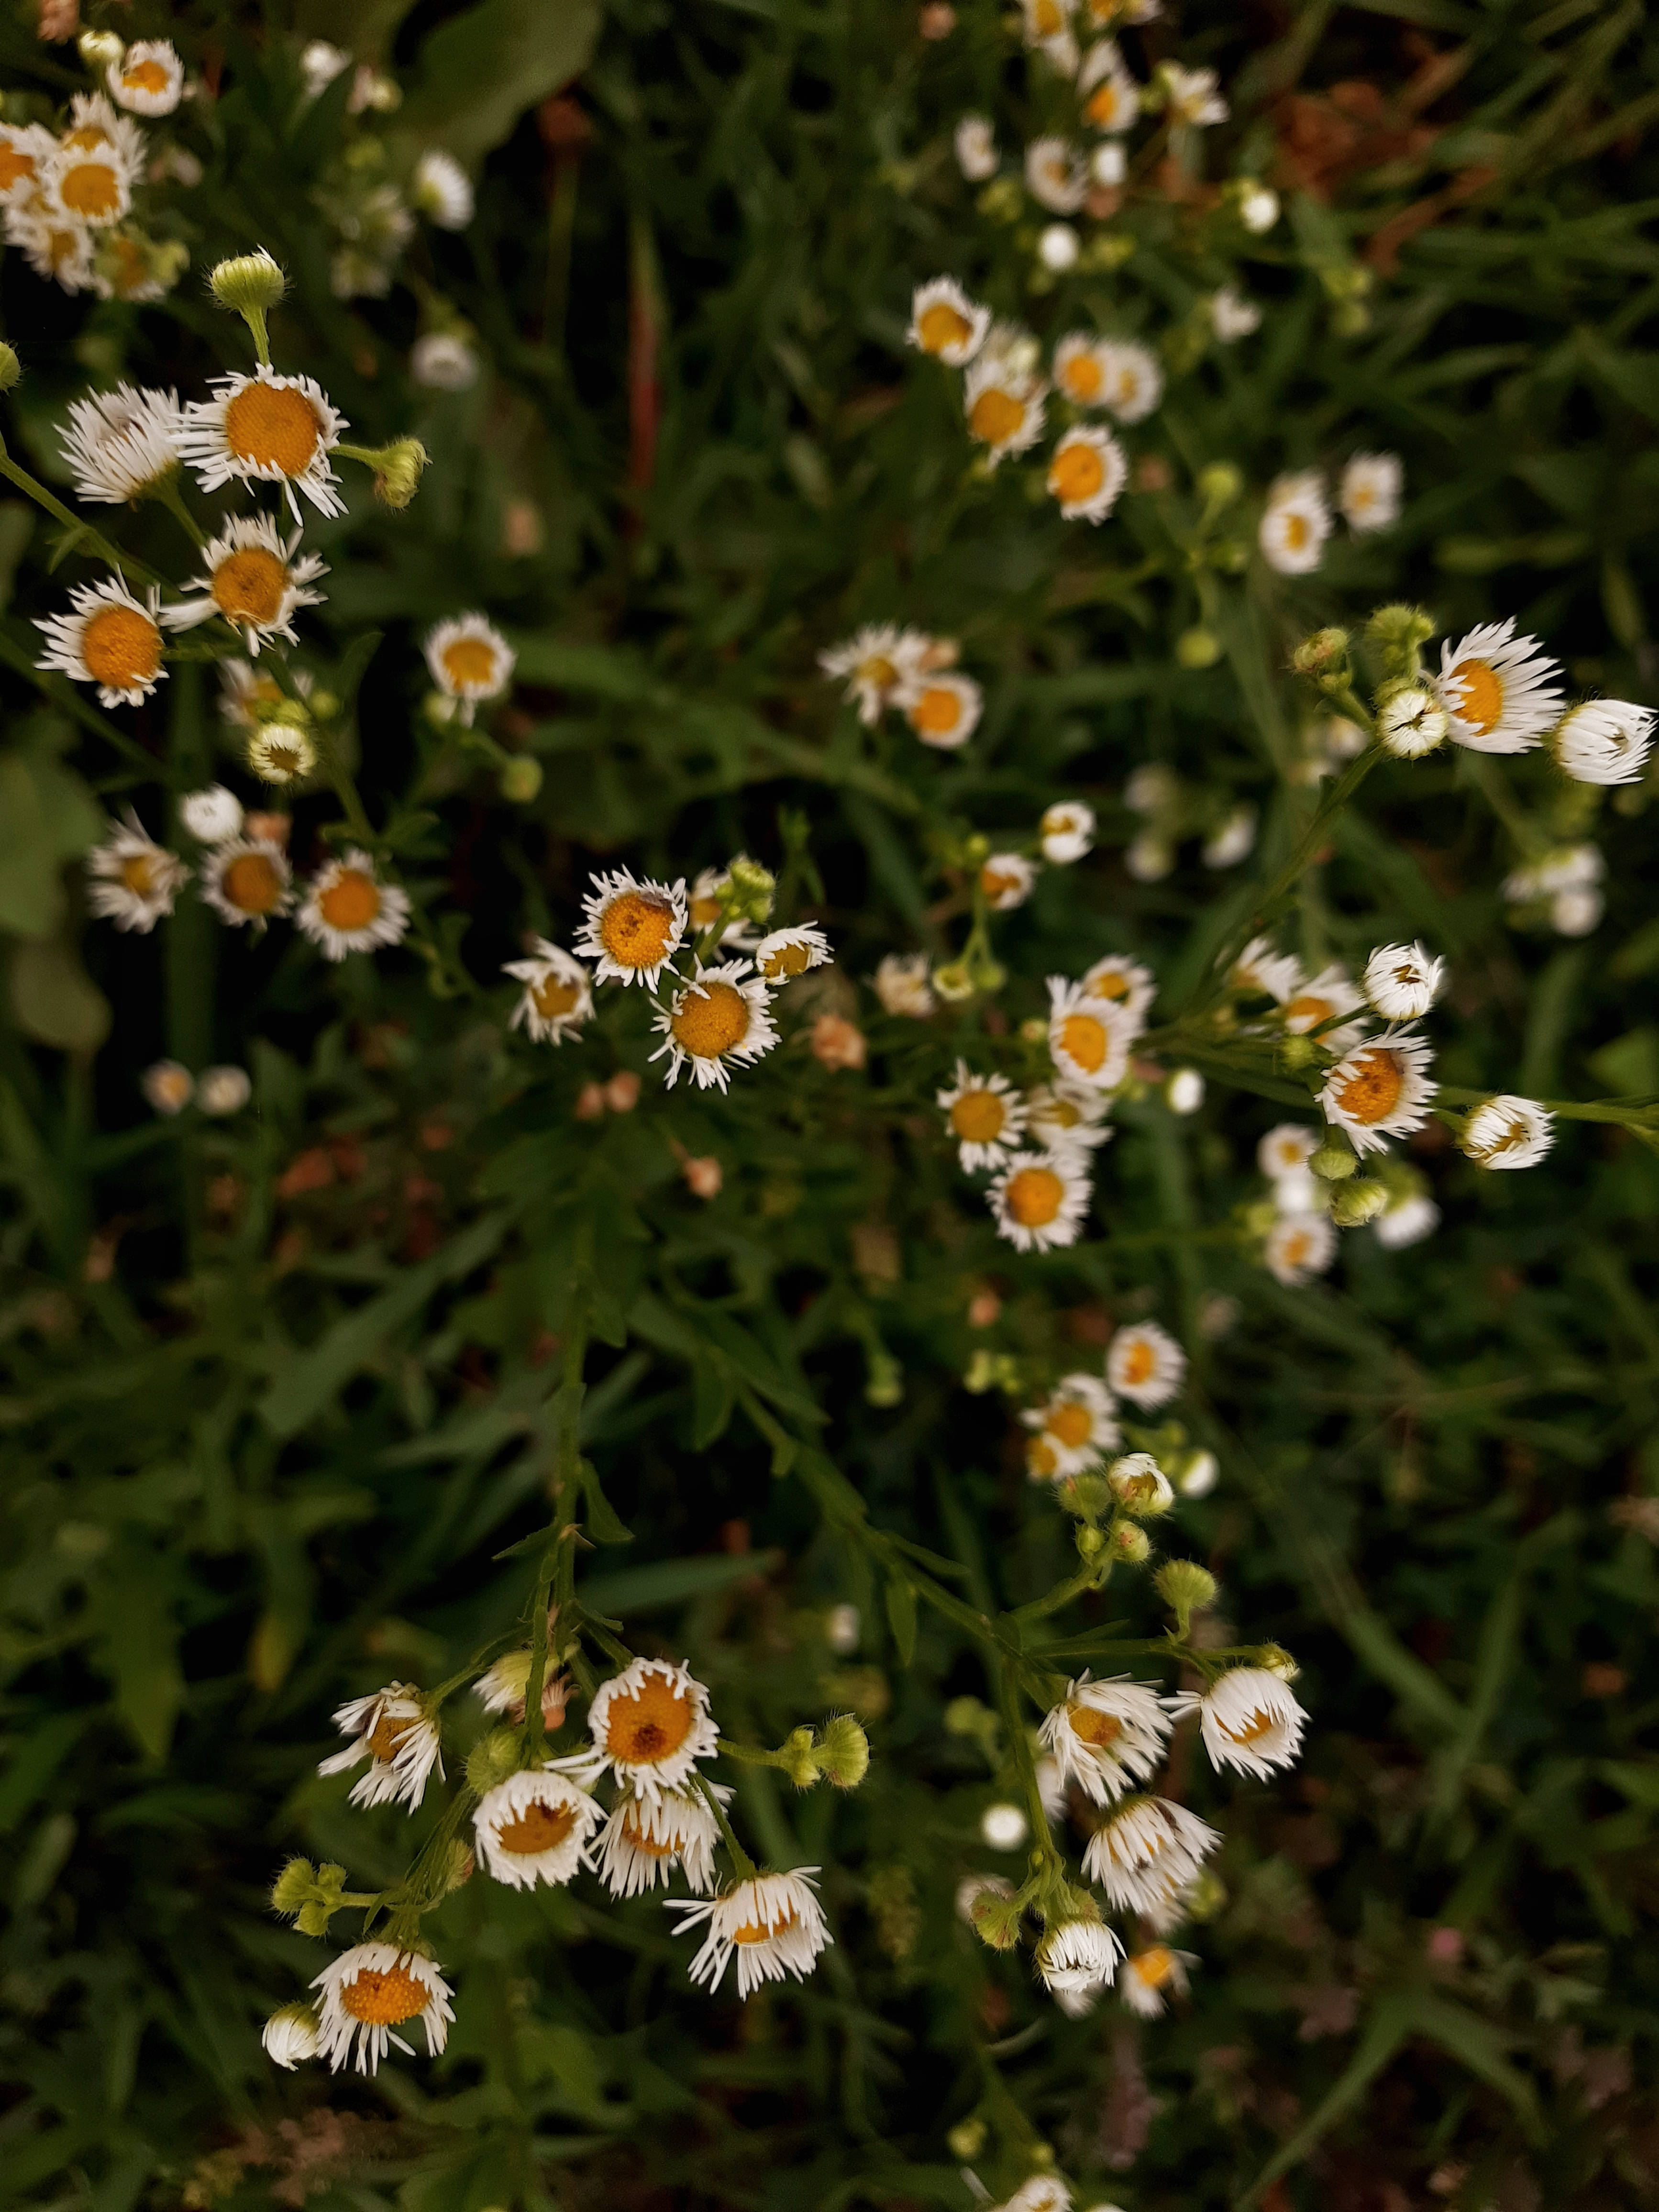 A bunch of white flowers with yellow centers - Cottagecore